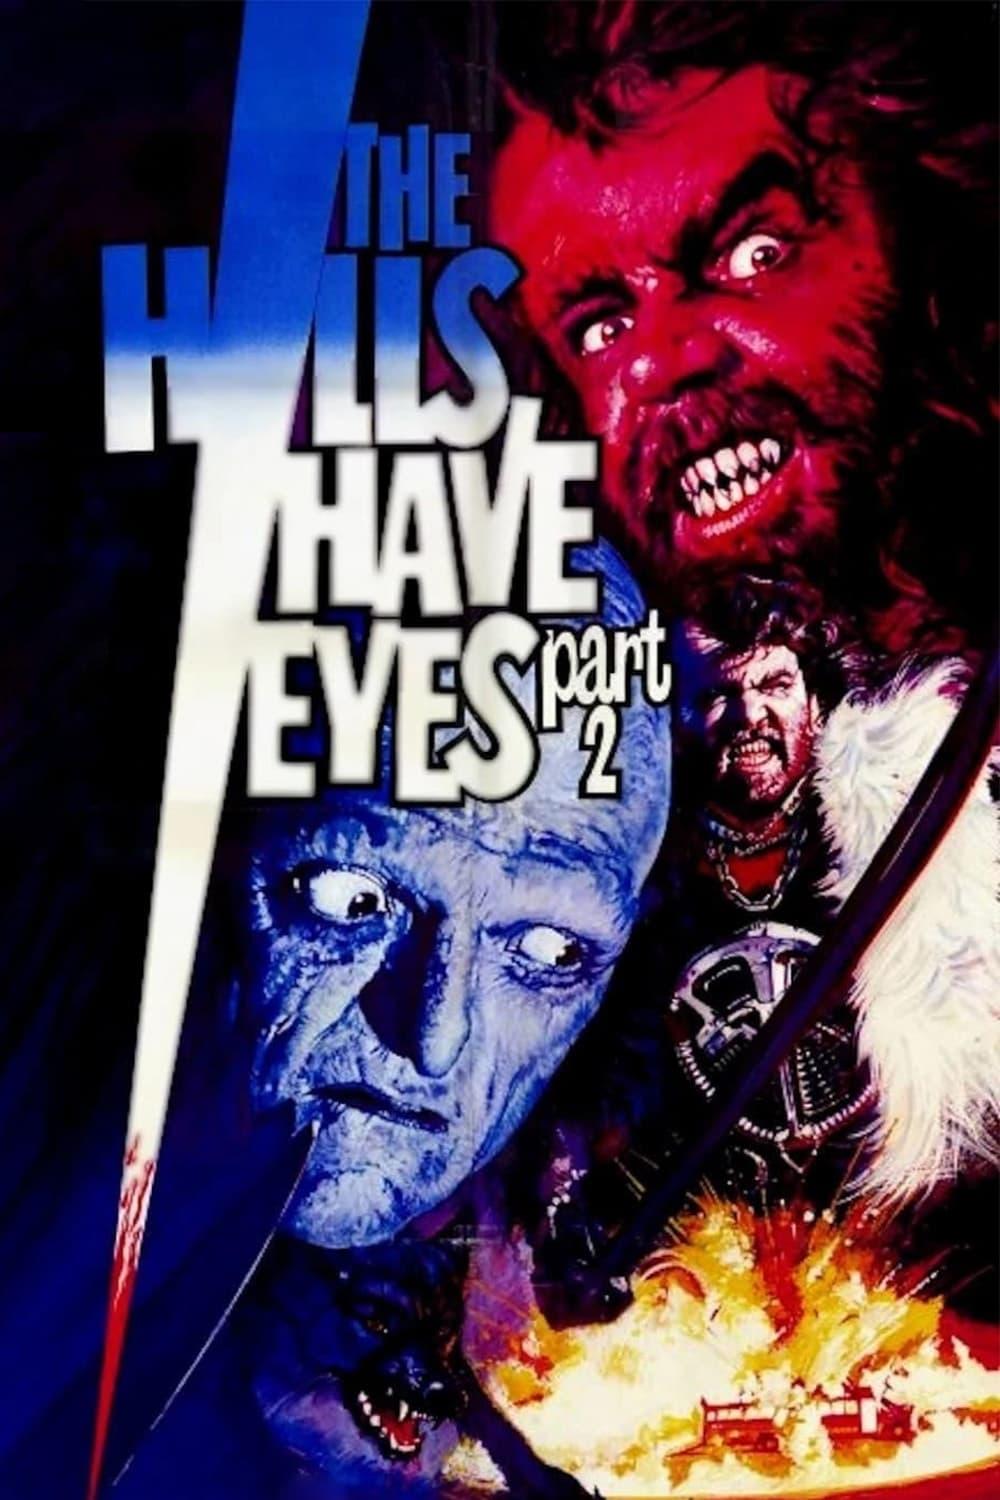 The Hills Have Eyes Part 2 poster